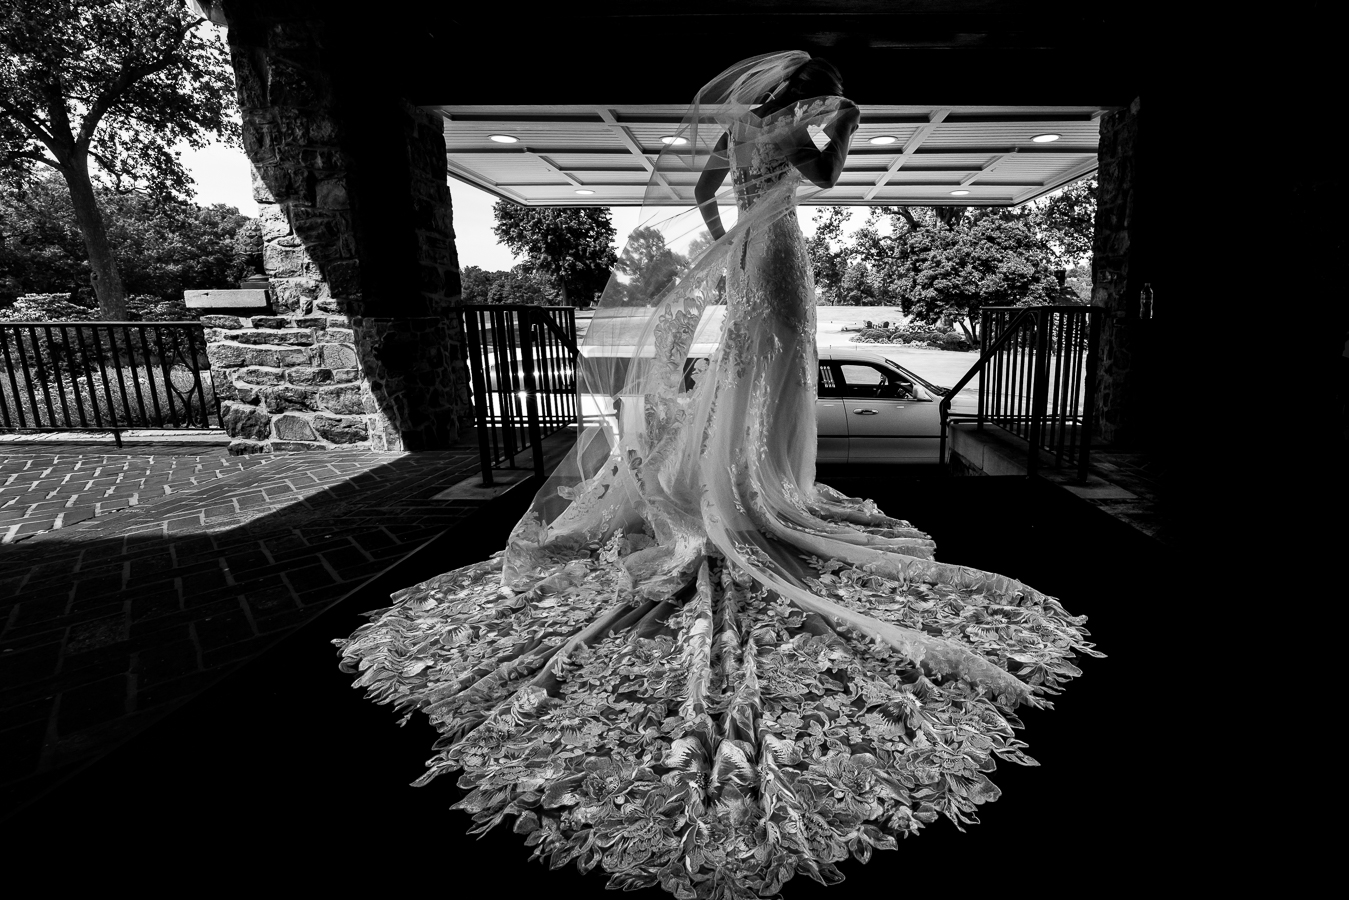 creative, classic black and white image of the bride in her wedding gown with her train spread out before her wedding ceremony